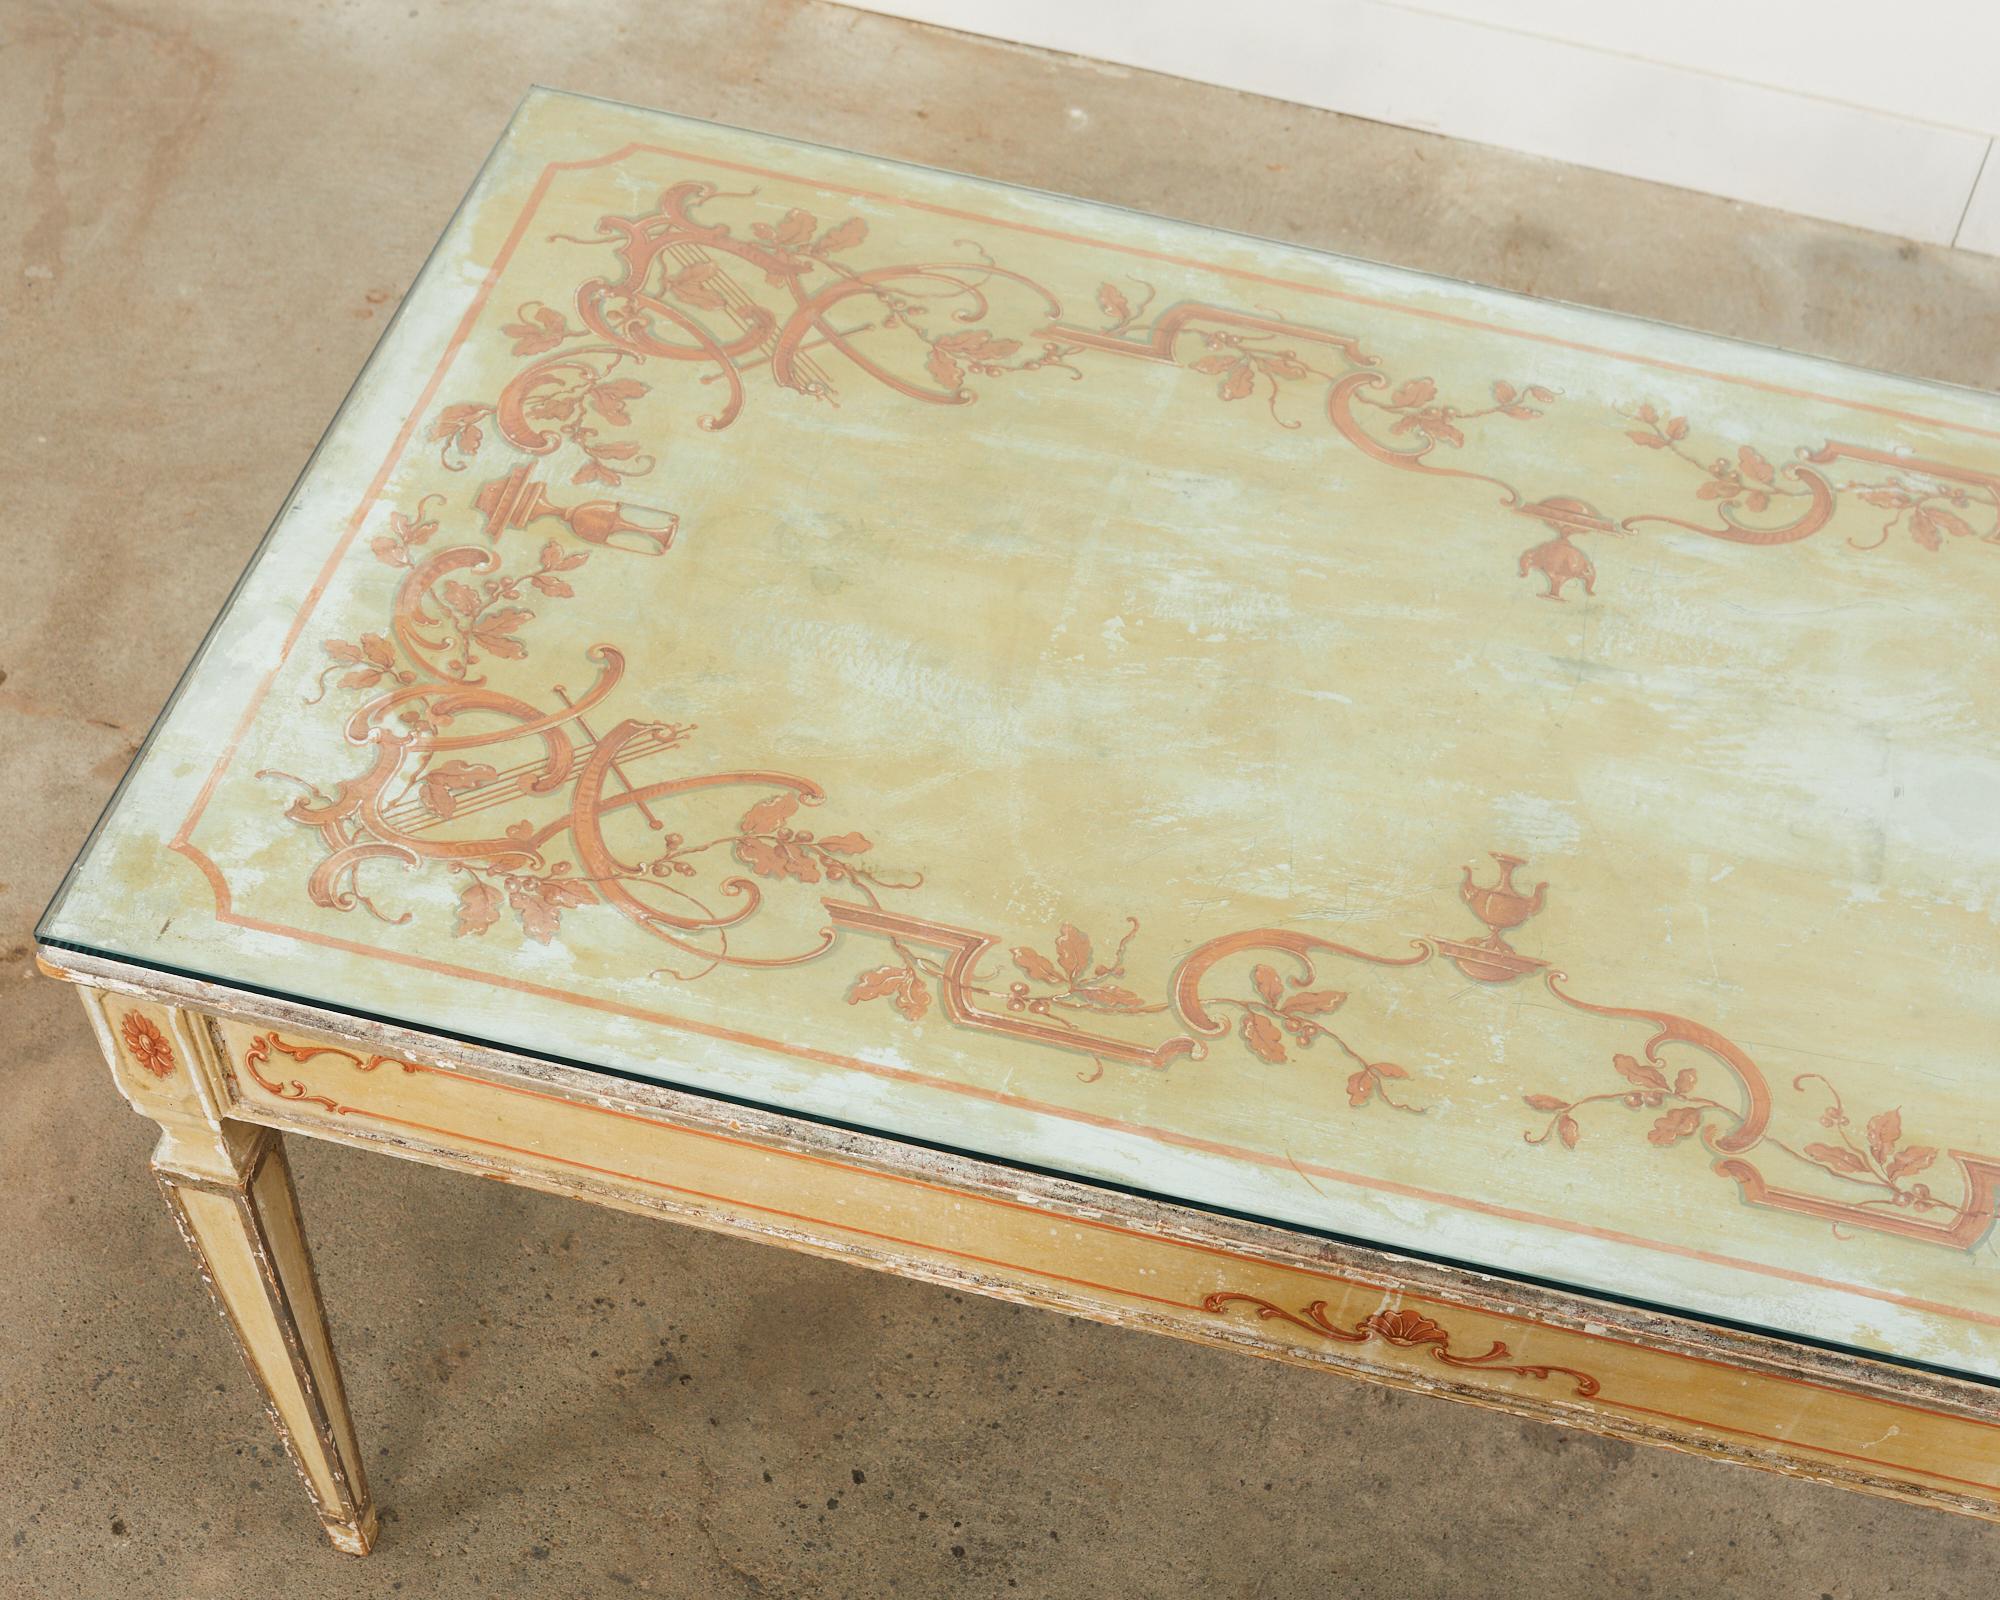 19th Century Italian Neoclassical Style Venetian Painted Dining Table For Sale 3